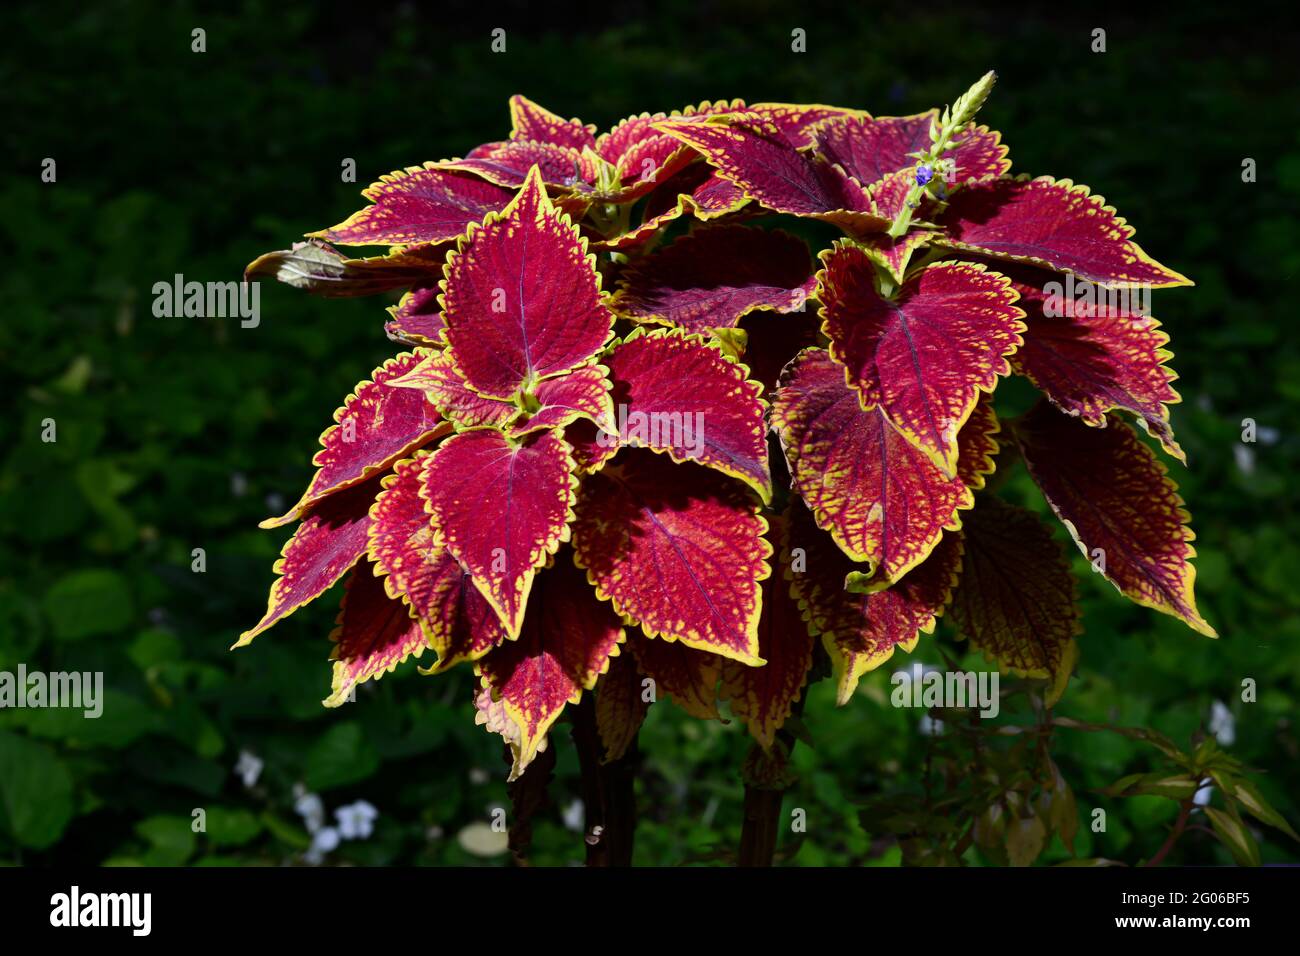 Top view of Coleus bushy woody based evergreen perennial decorative flowering plant with dark red leaves, belonging to the Labiatae family. Stock Photo